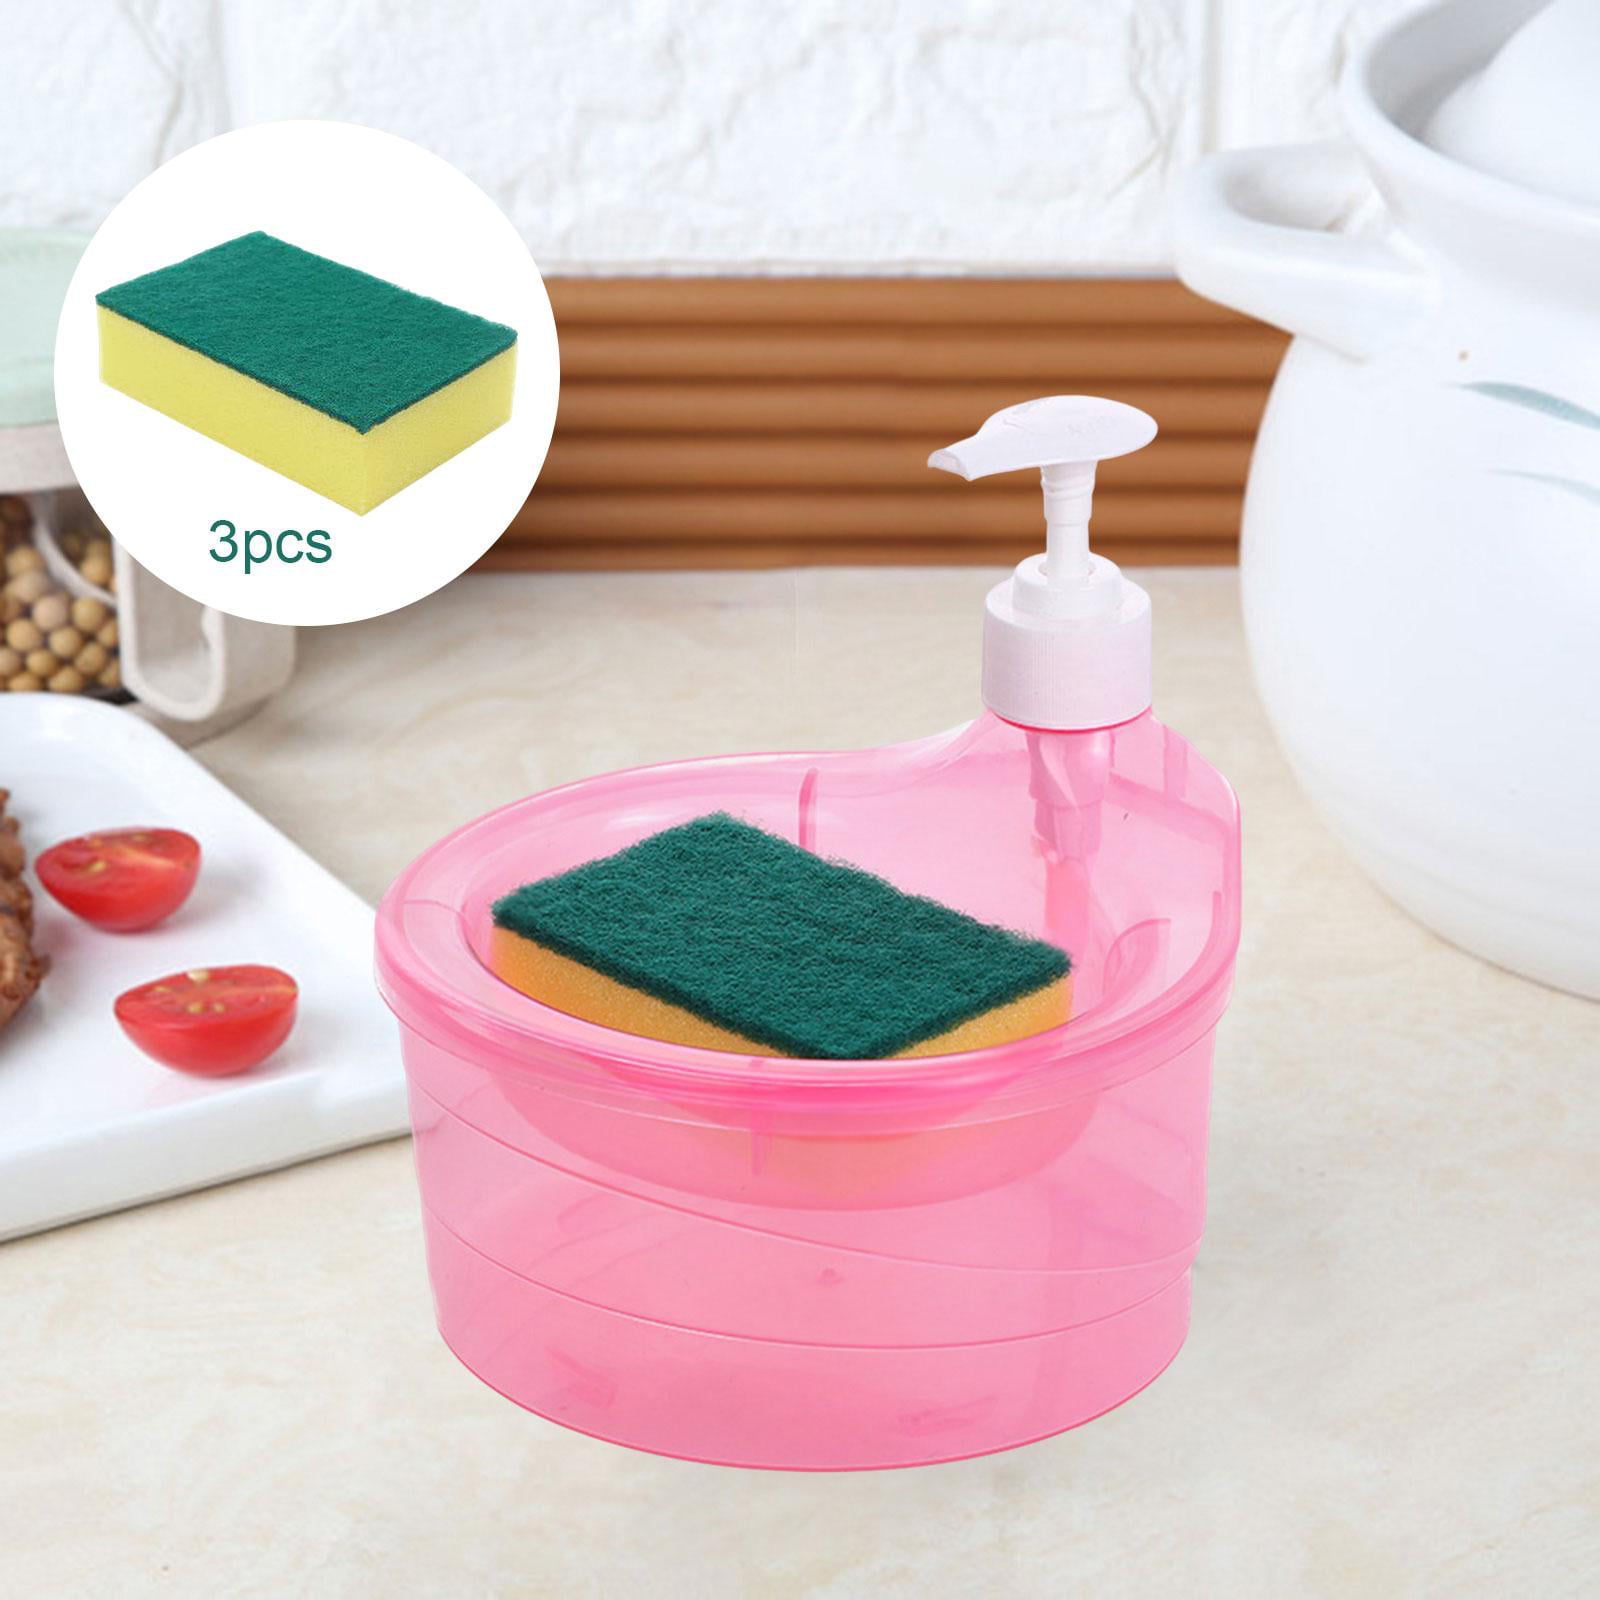 19 Pack Kitchen Clean Sponges for Dish,1 Pack Dish Soap Dispenser for Kitchen, Soap Dispenser and Sponge Holder 2 in1